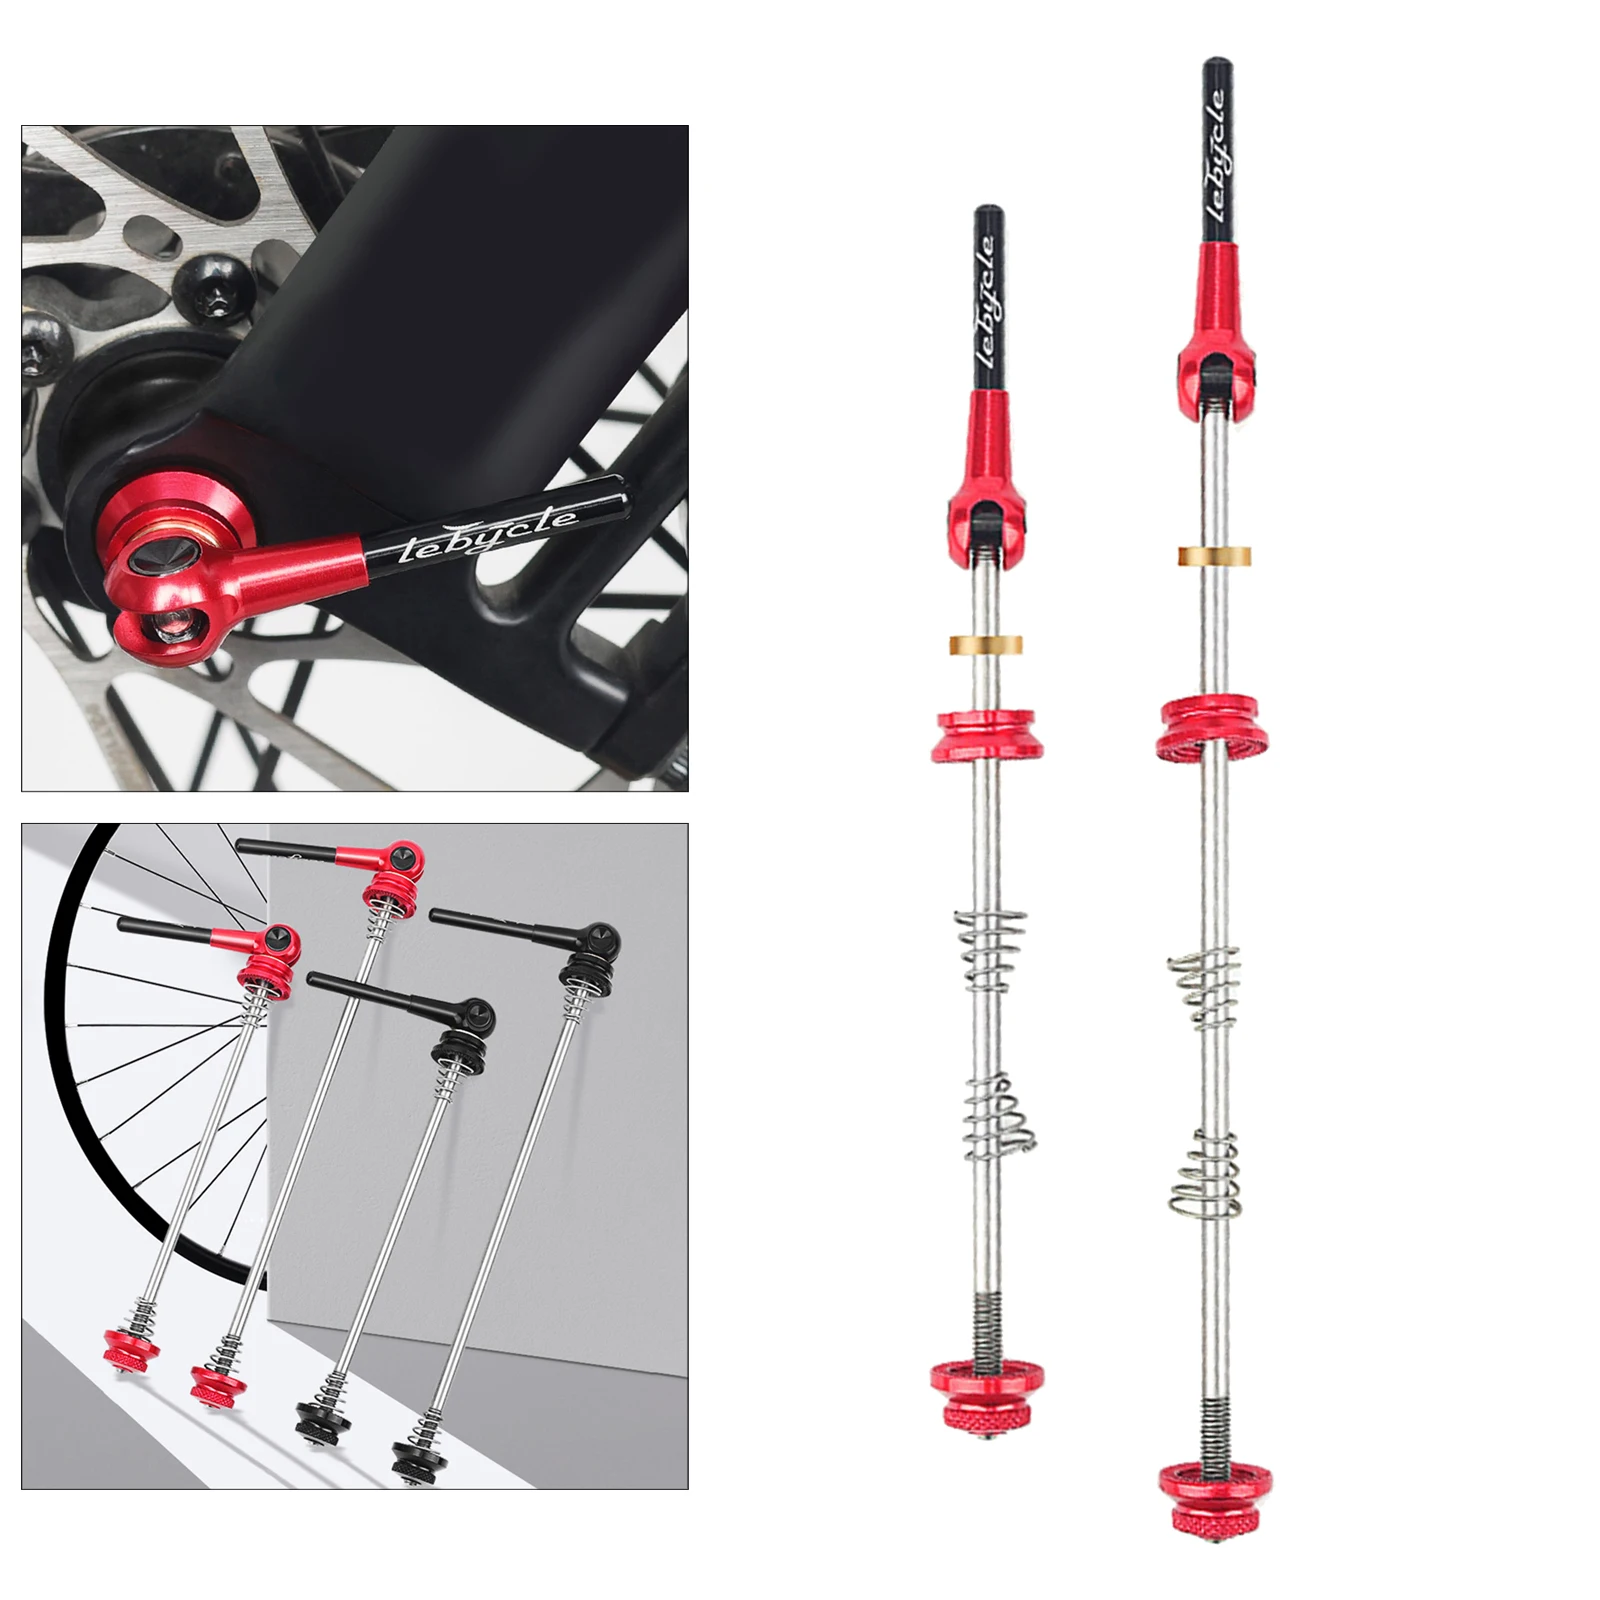 2x Ultralight Titanium Bicycle Skewers Quick Release Front 140mm Rear 180mm Accessory Axle Skewer Hub Alloy for MTB Bike Repair